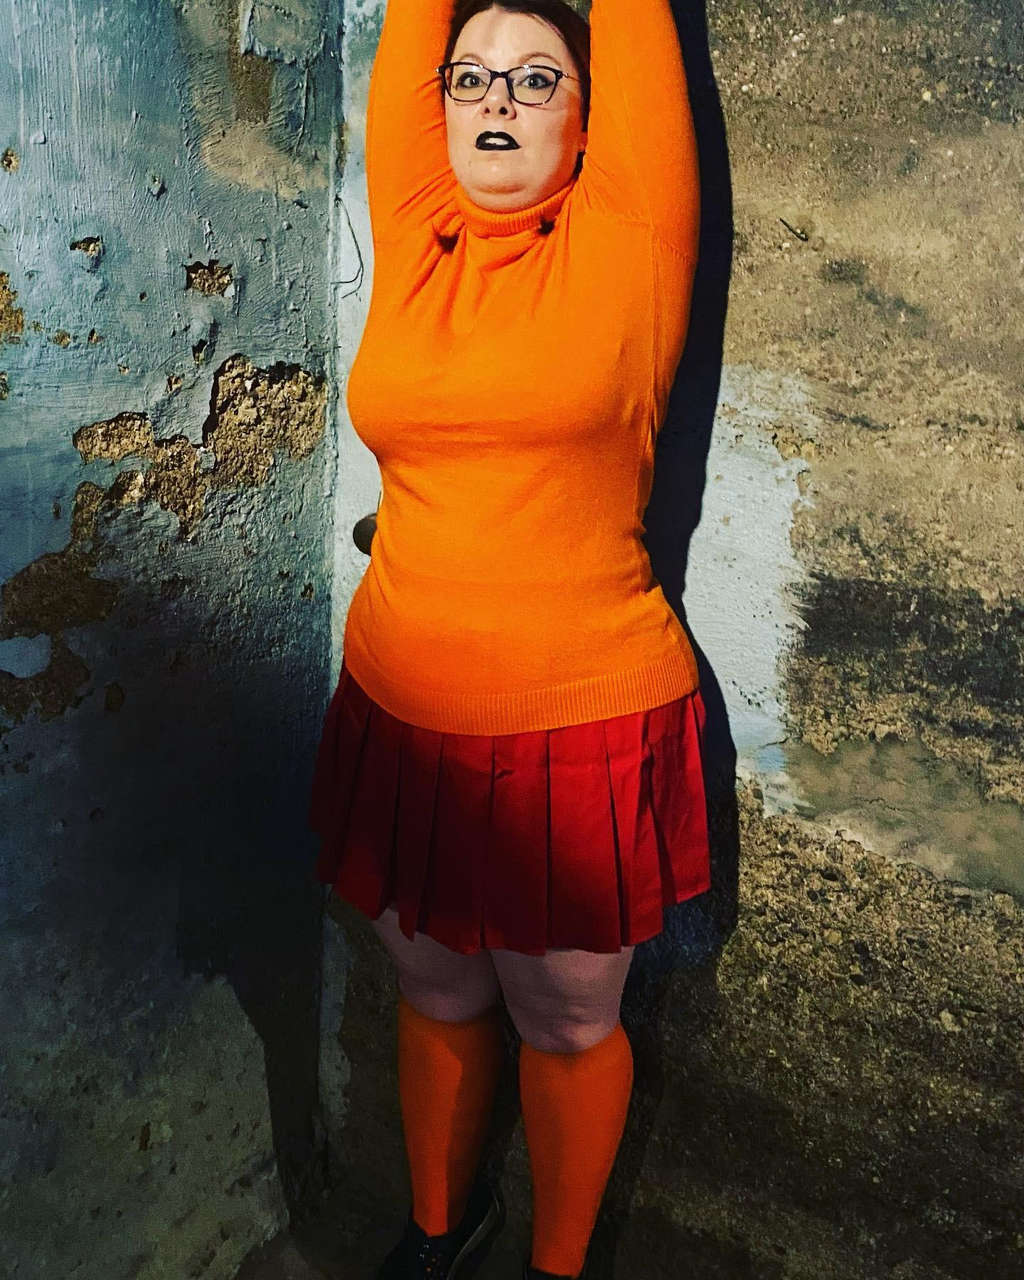 Want To Play A Game Come Find Me 36f Velma Been Done By Trekin